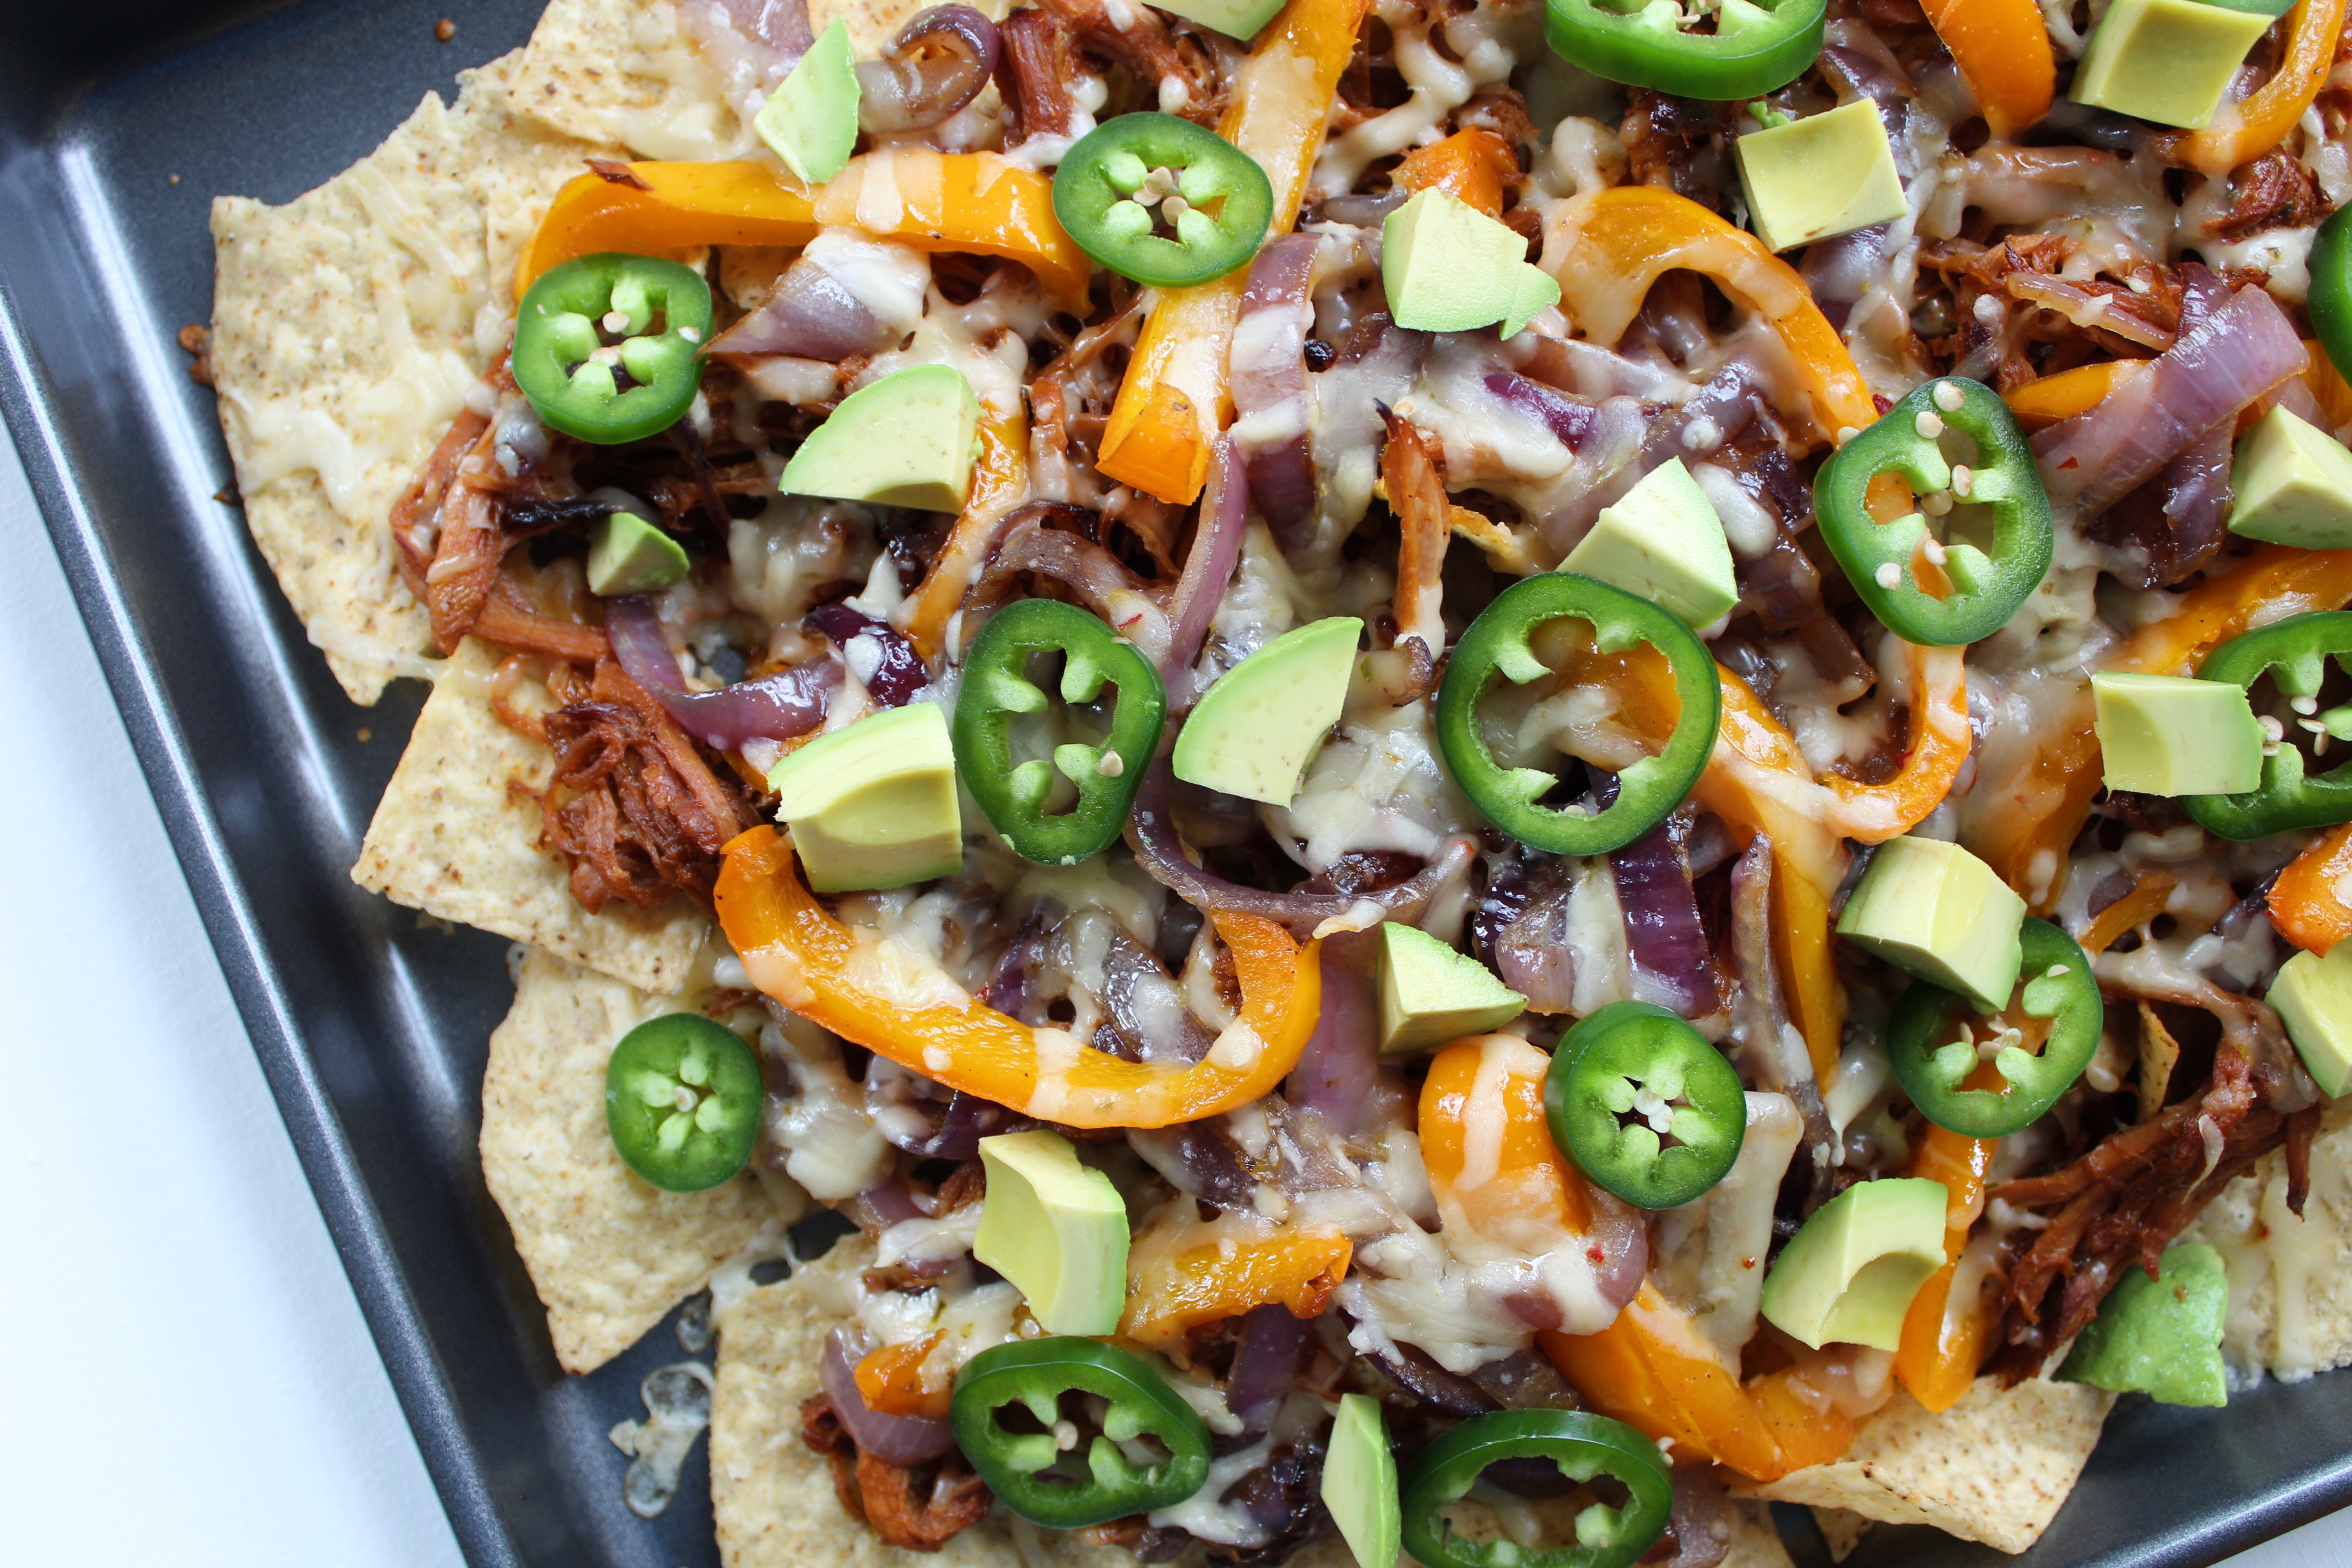 These nachos are topped with BBQ pork, fajita-style peppers and onions, and more fun toppings, and they'll make great party food!